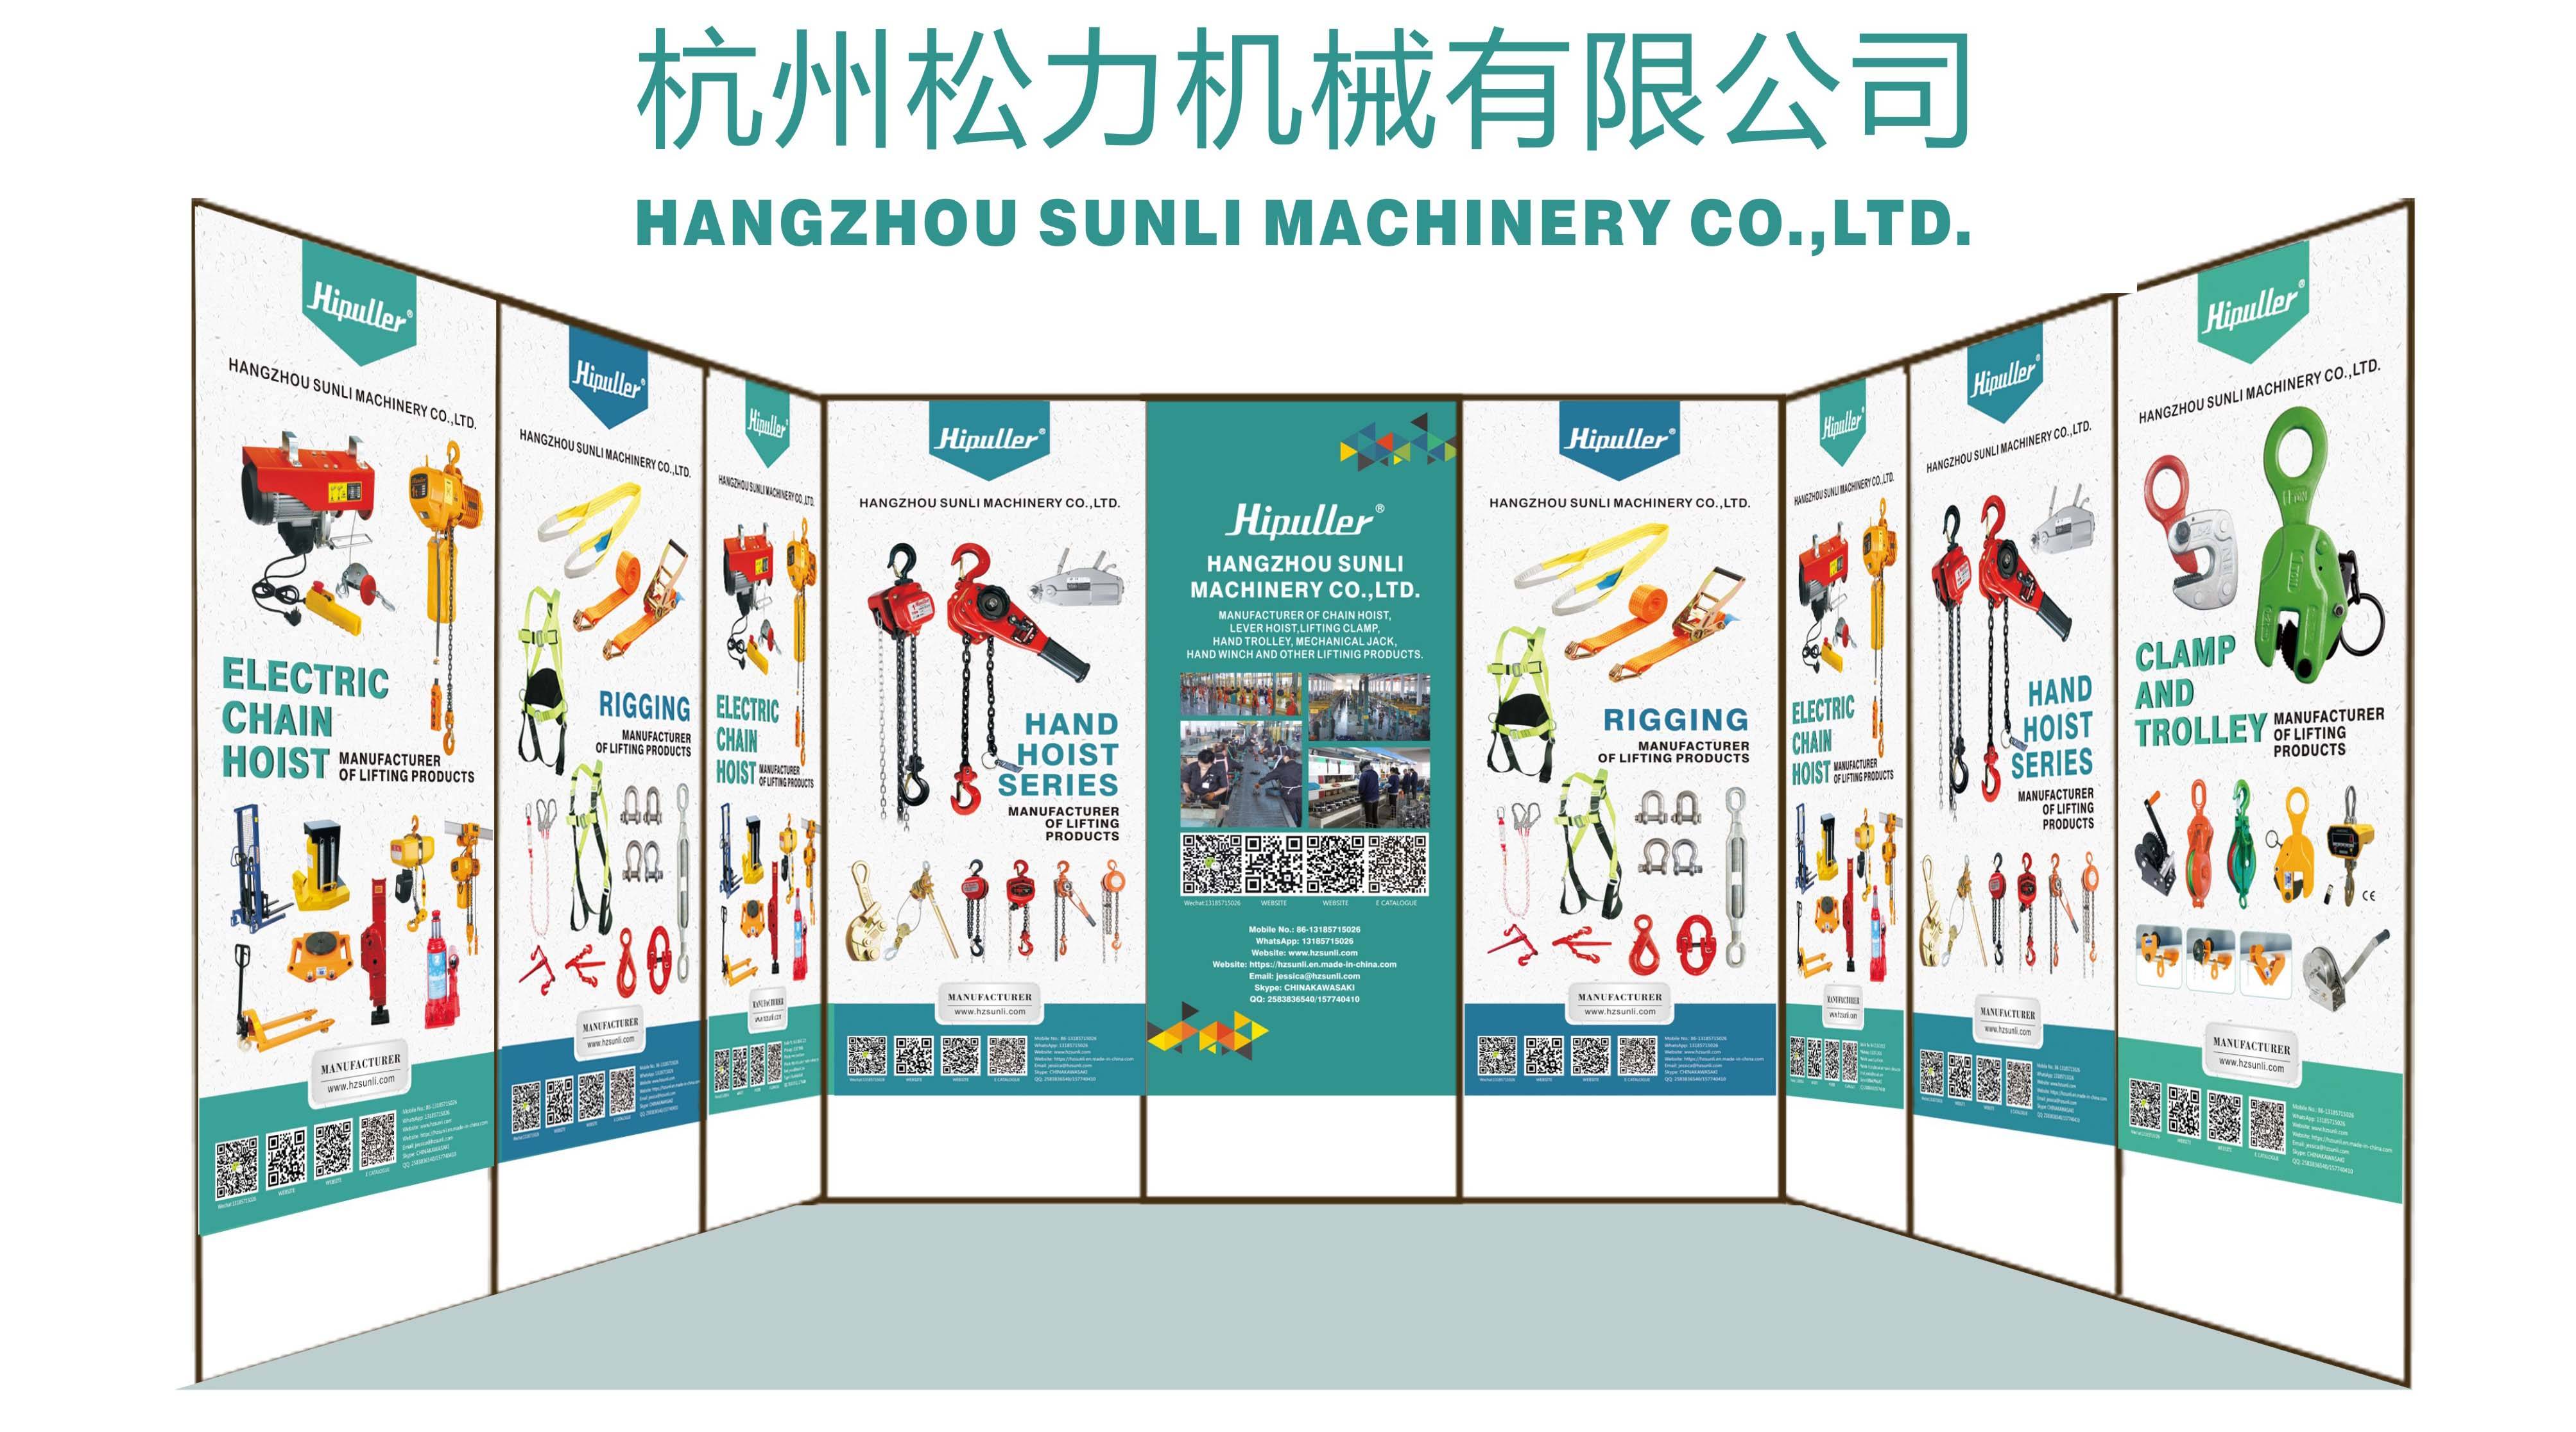 Welcome to canton fair, our booth number is 15.3D57  from Apr.15 to Apr.19 2019